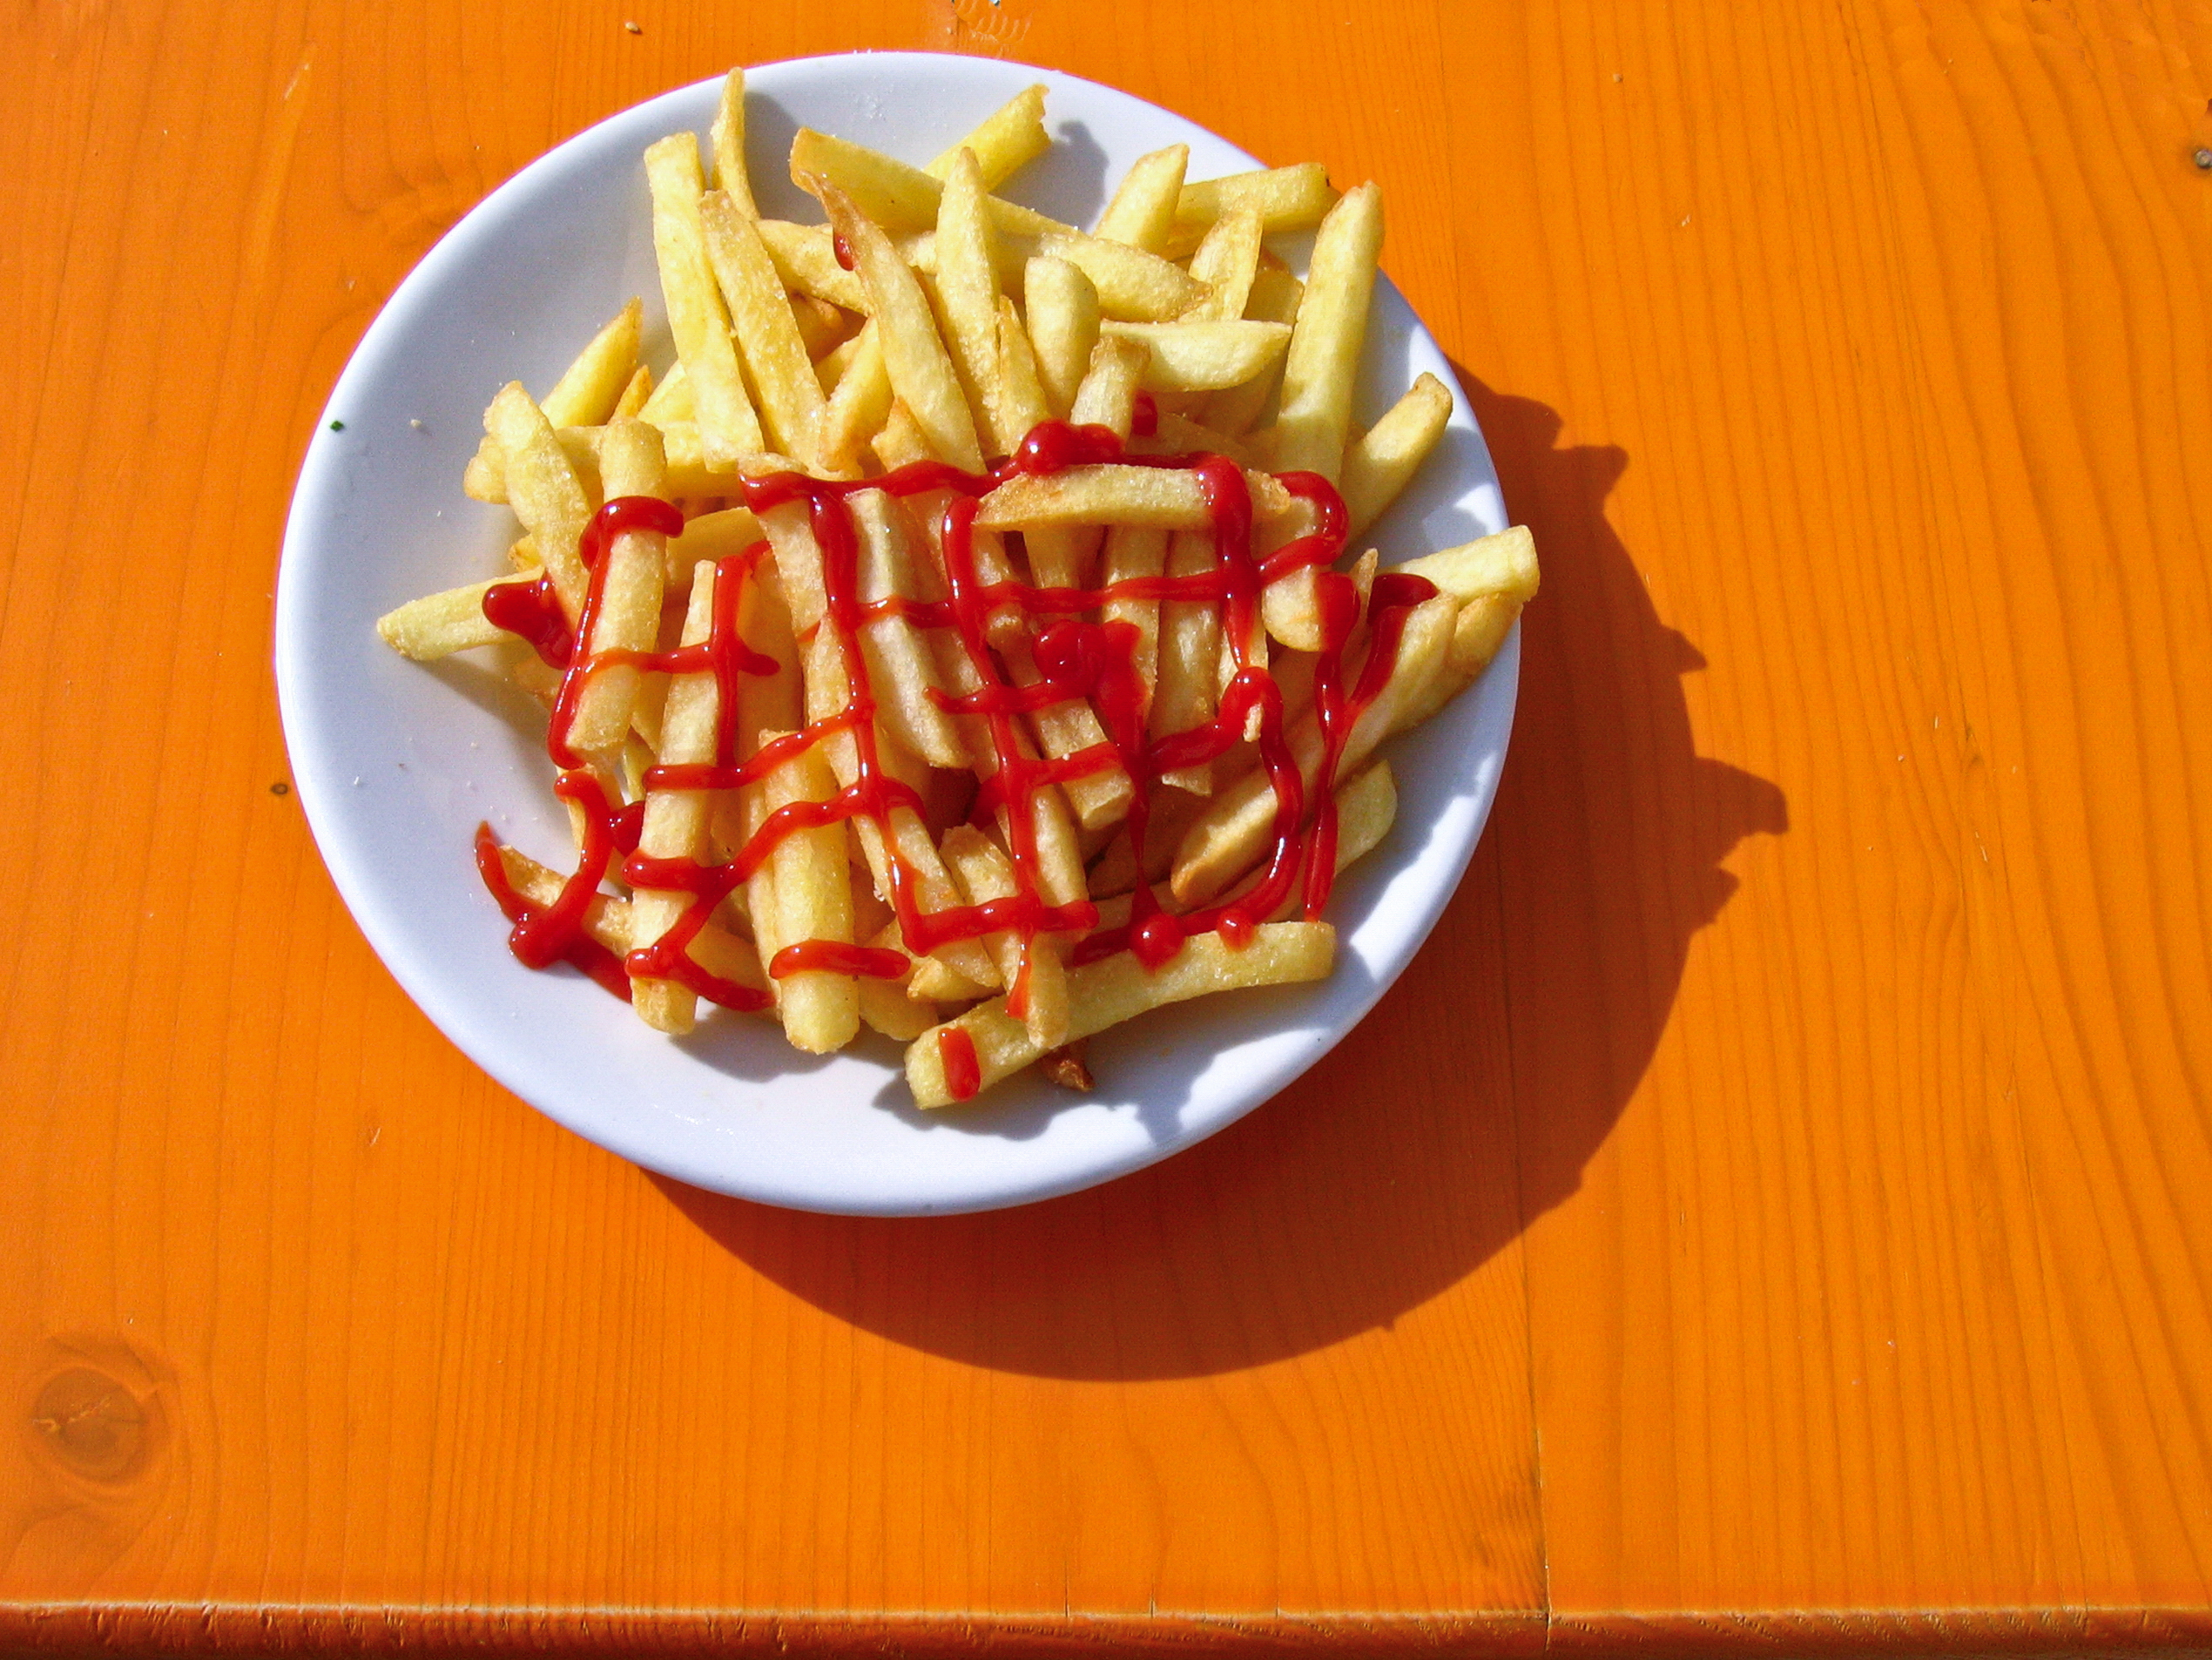 A plate of french fries with ketchup